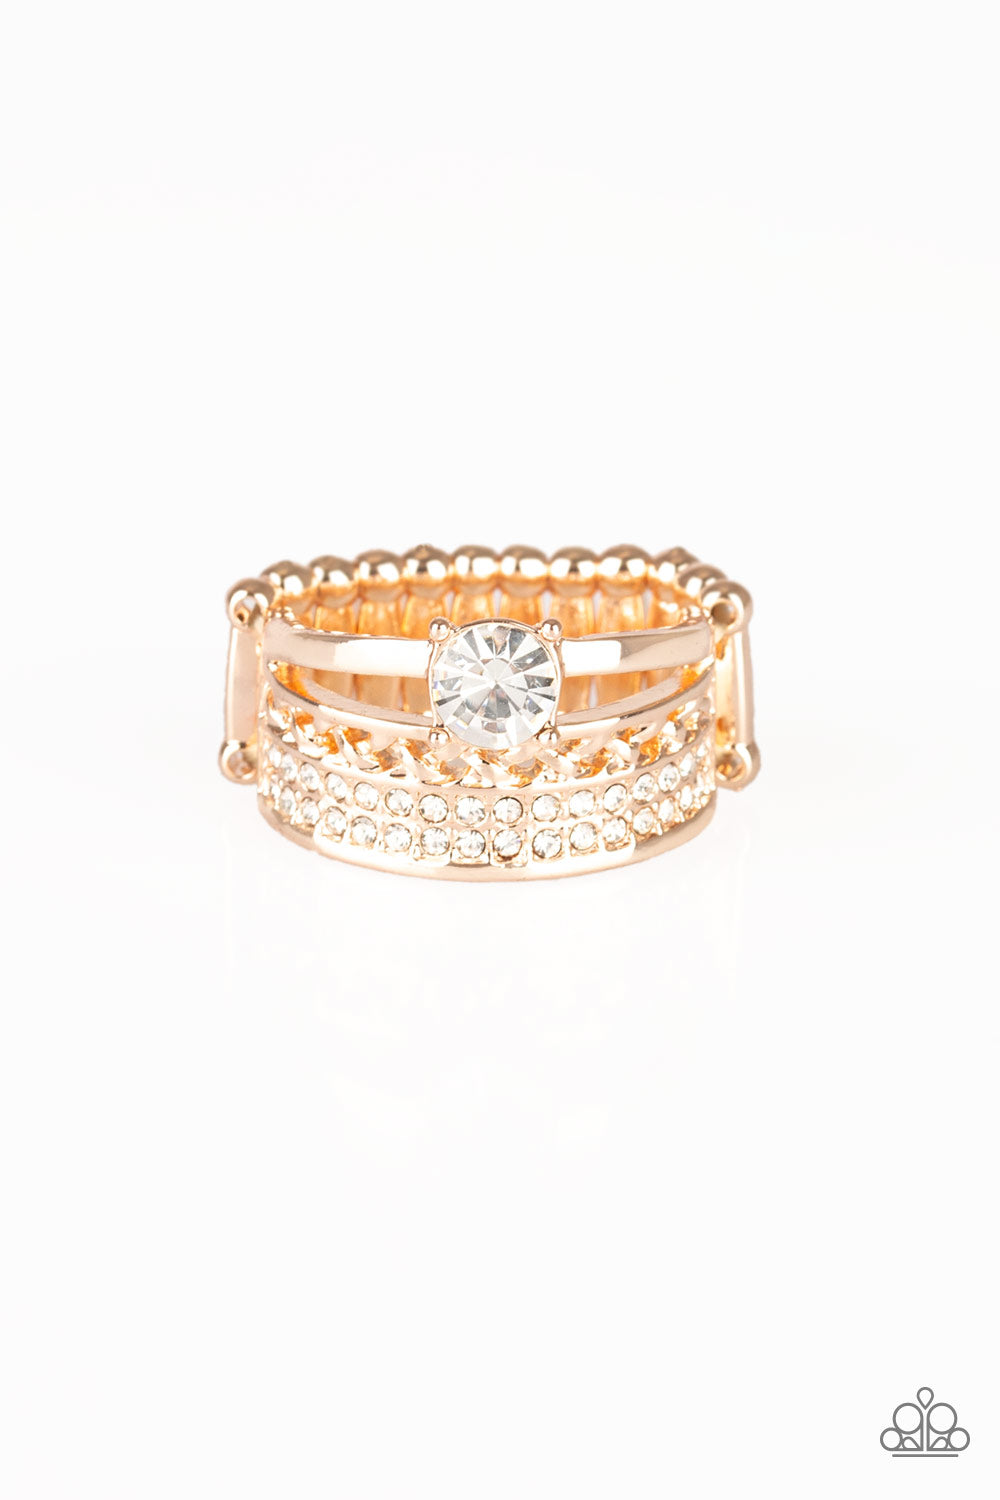 The Overachiever - Rose Gold - VJ Bedazzled Jewelry